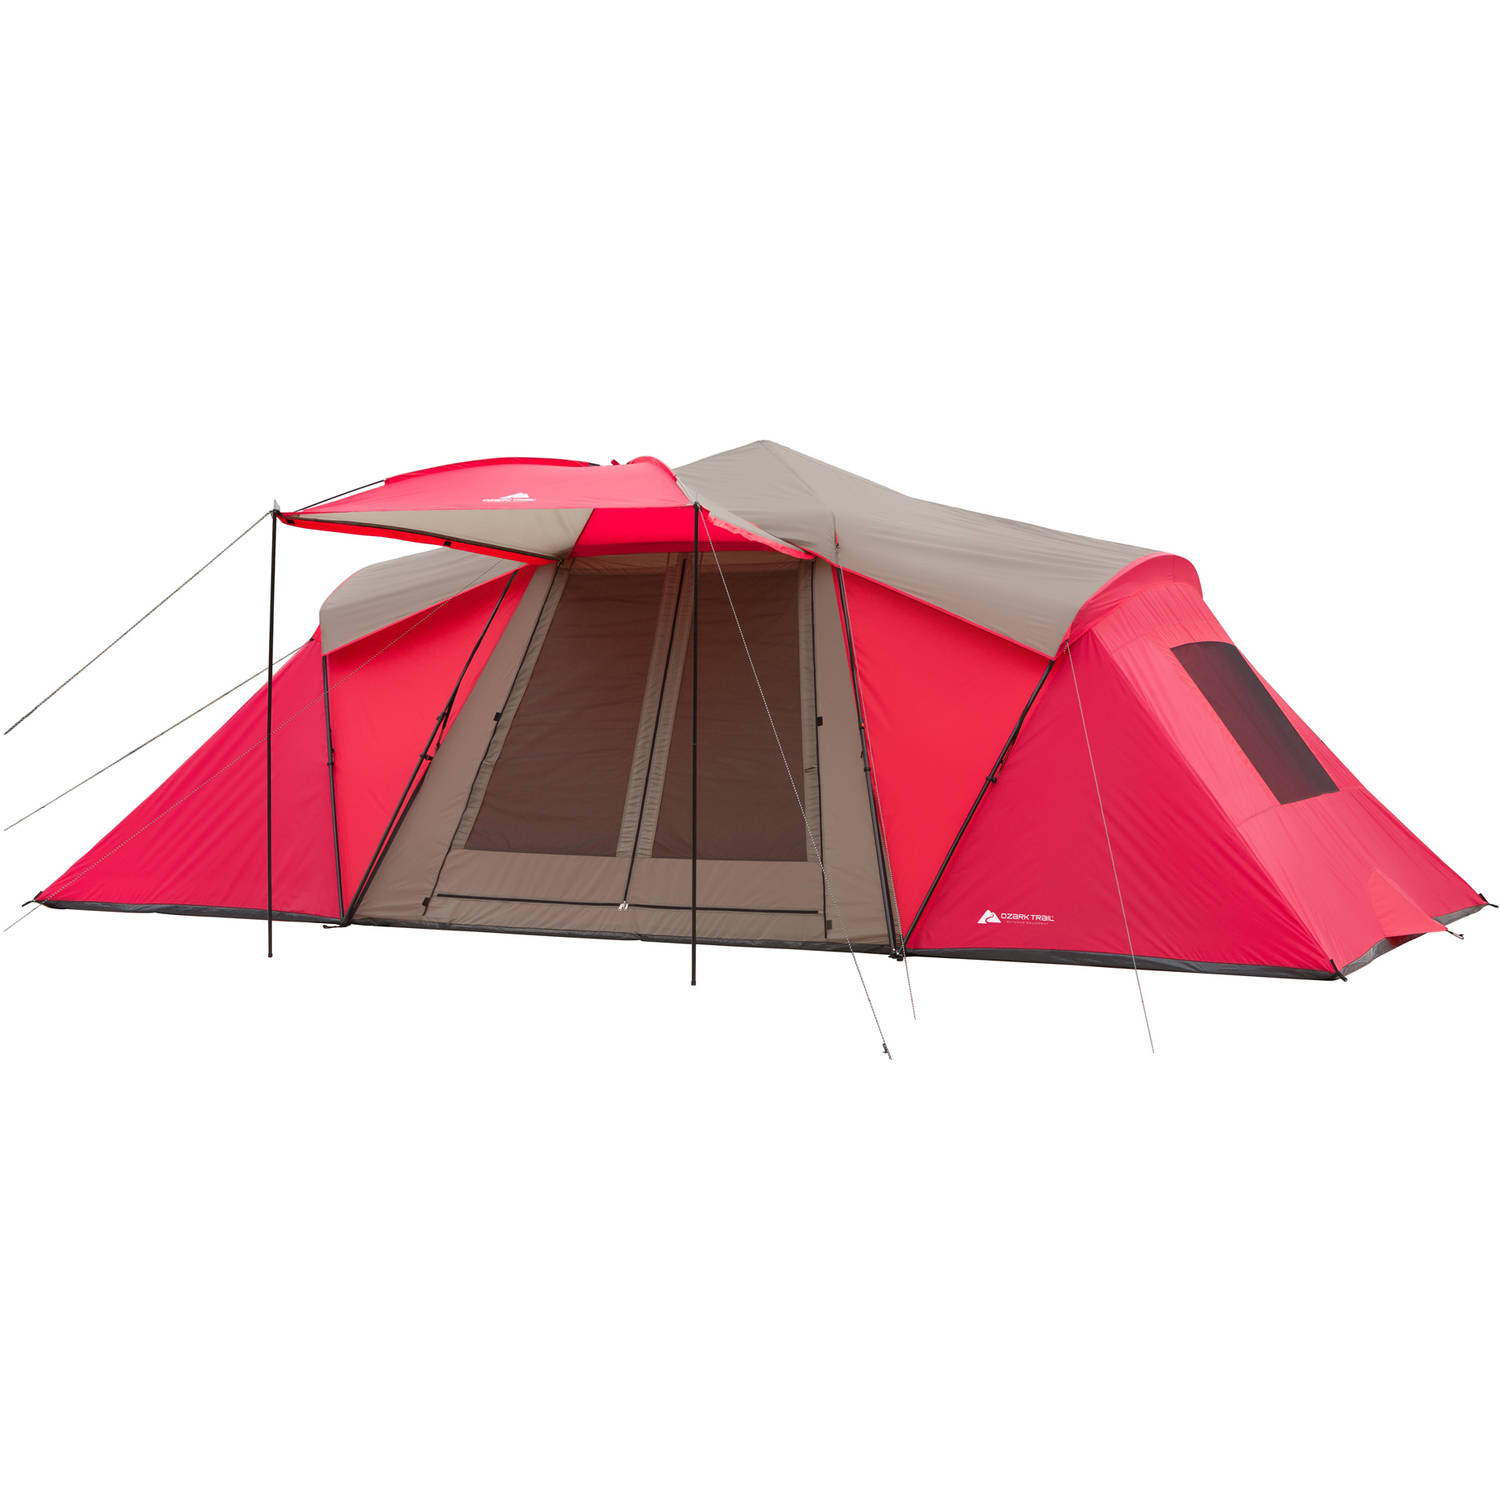 Ozark Trail 21' x 10' 3-Room Instant Tent with Awning, Sleeps 12, Red - image 1 of 11